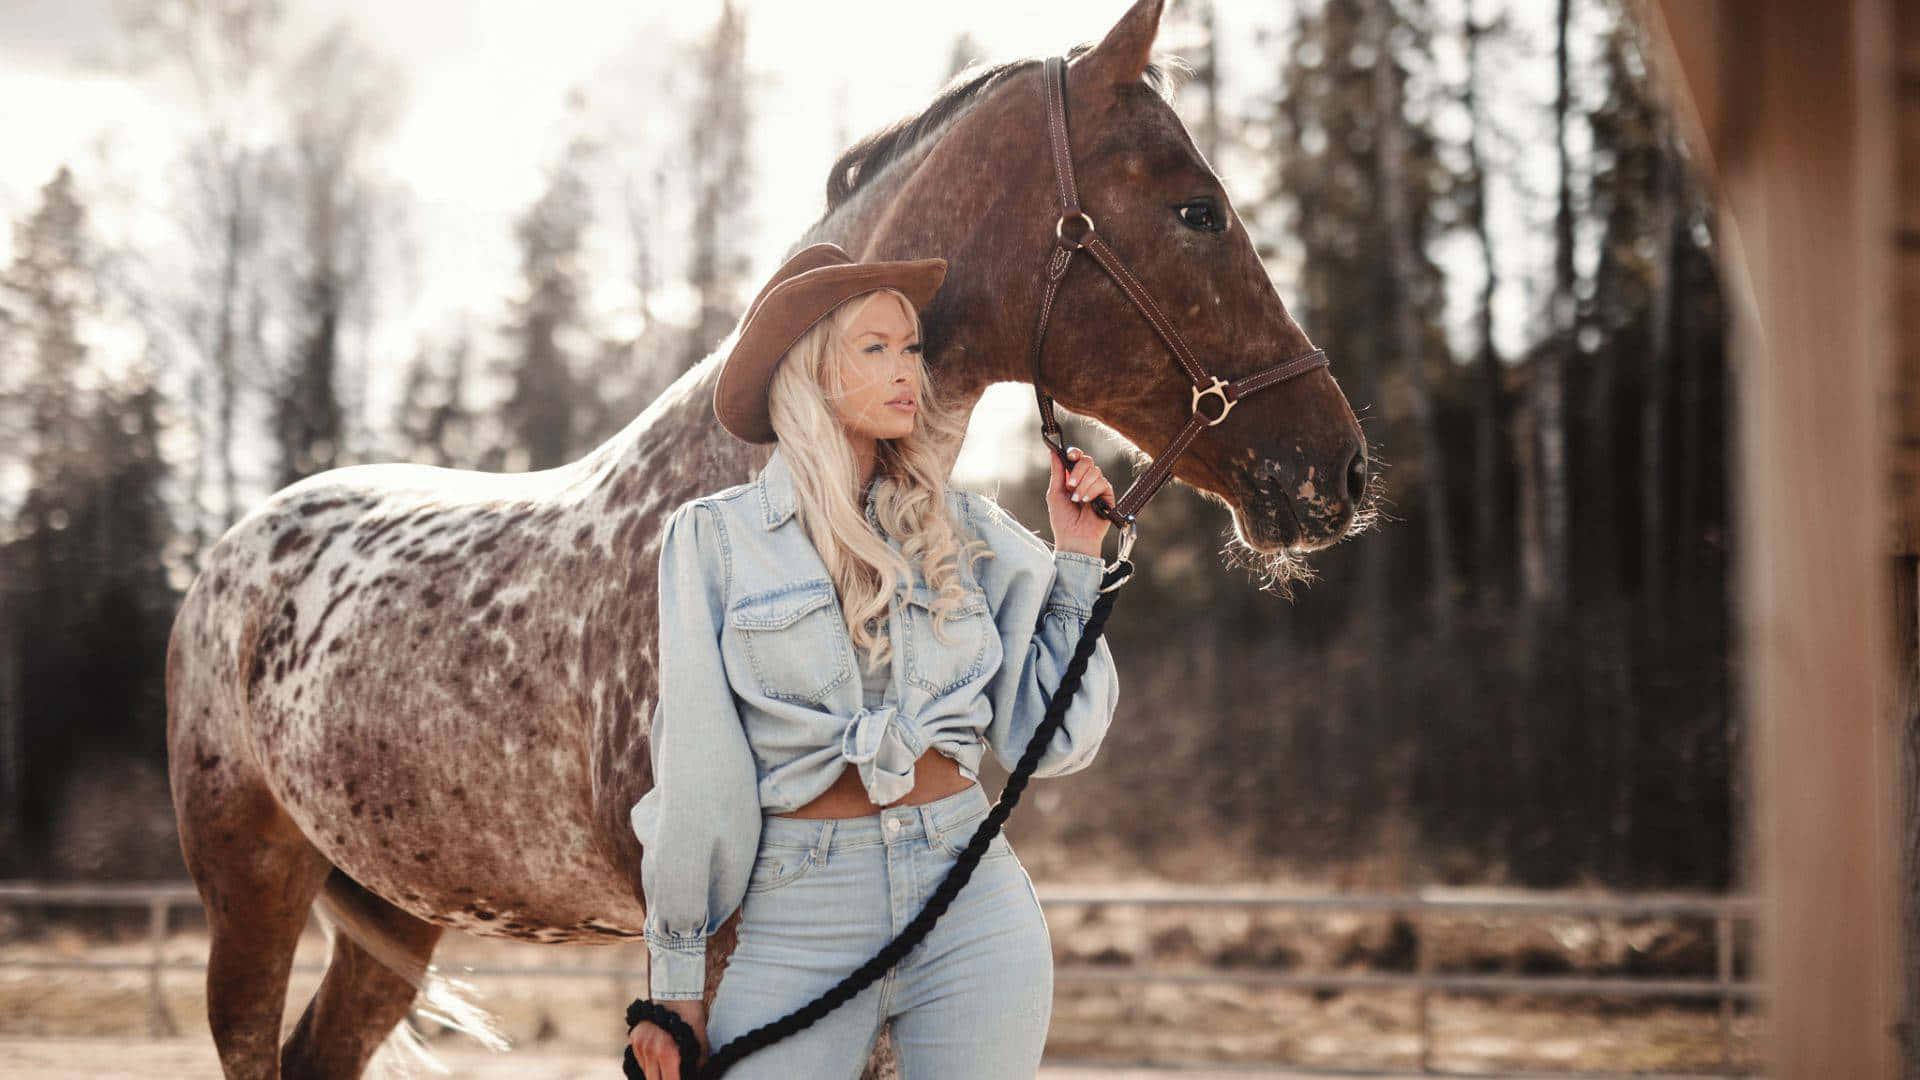 Cowgirl Aesthetic Model Posing With A Horse Wallpaper